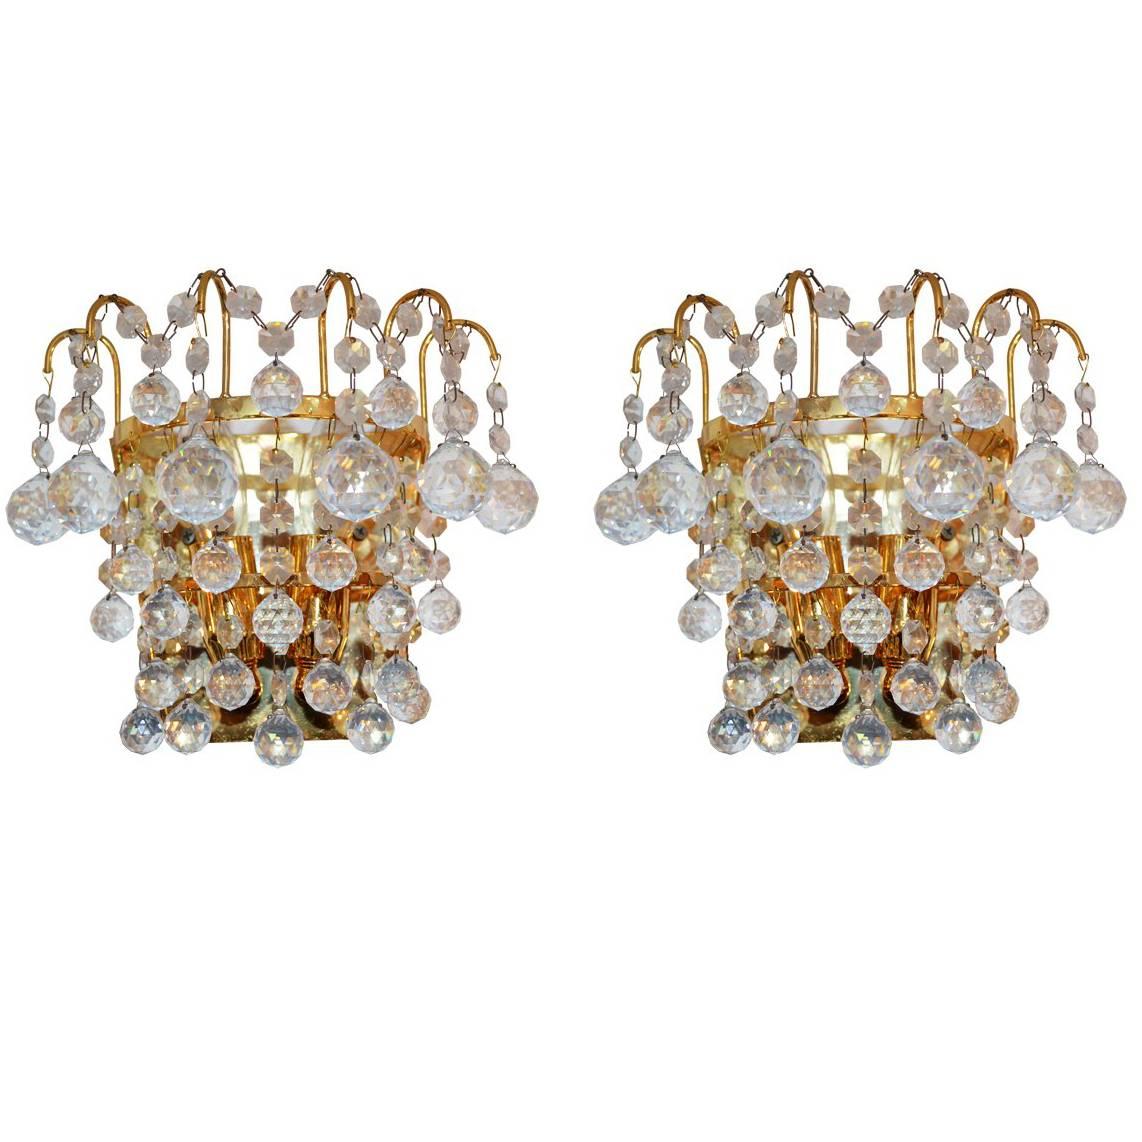 Pair of Mid-Century Crystal Wall Light Sconces